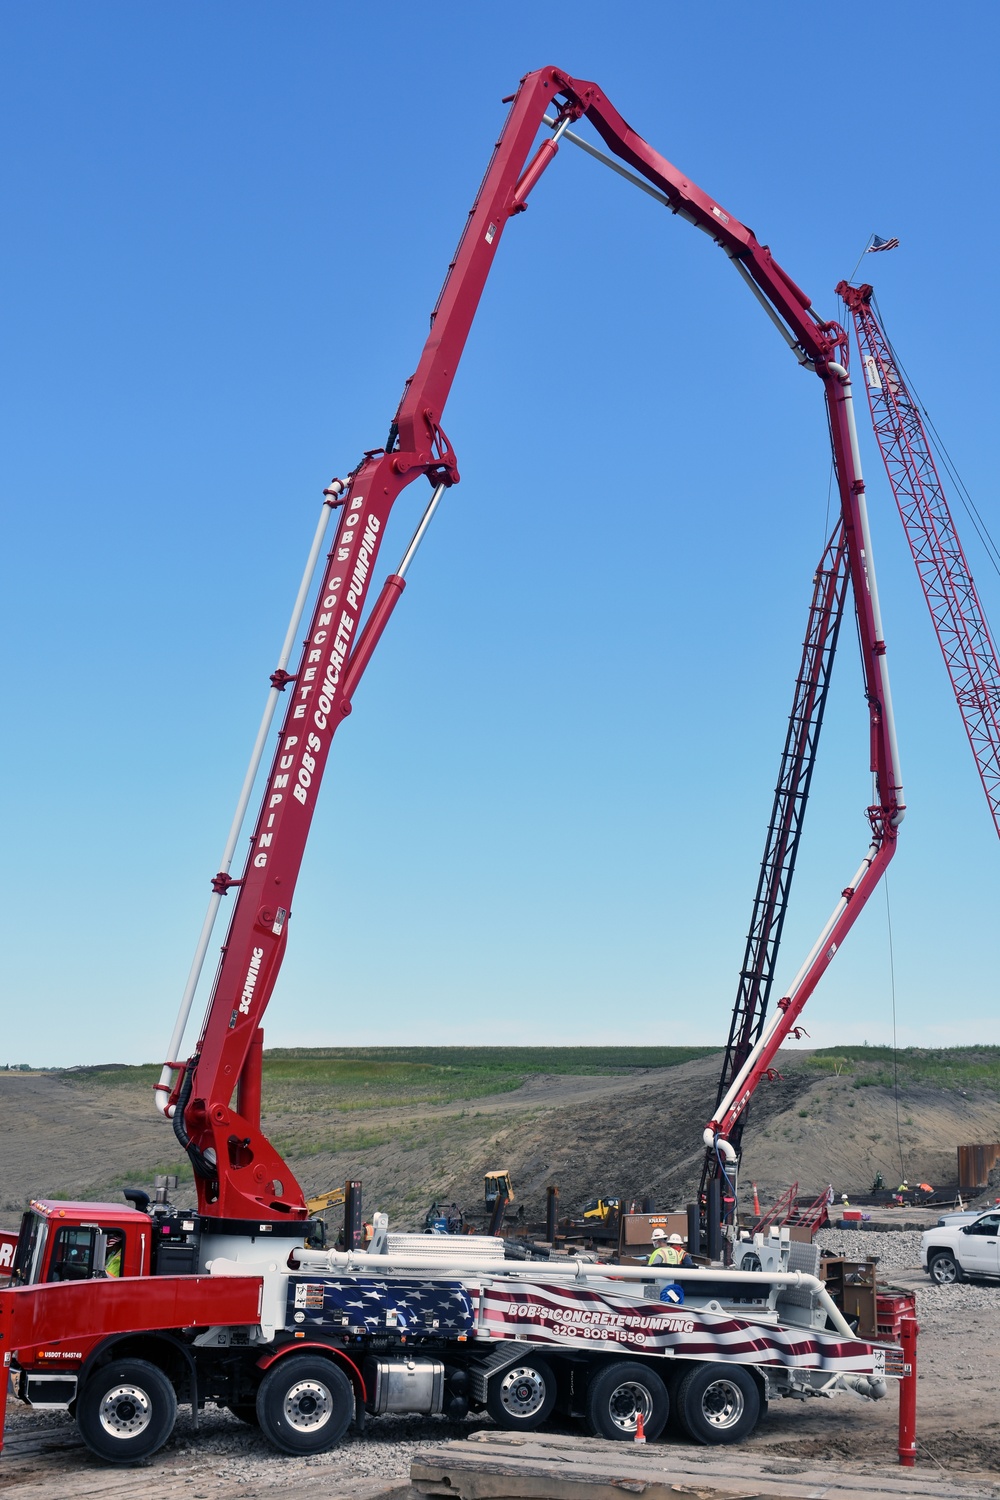 Construction reaches new heights on Red River of the North project